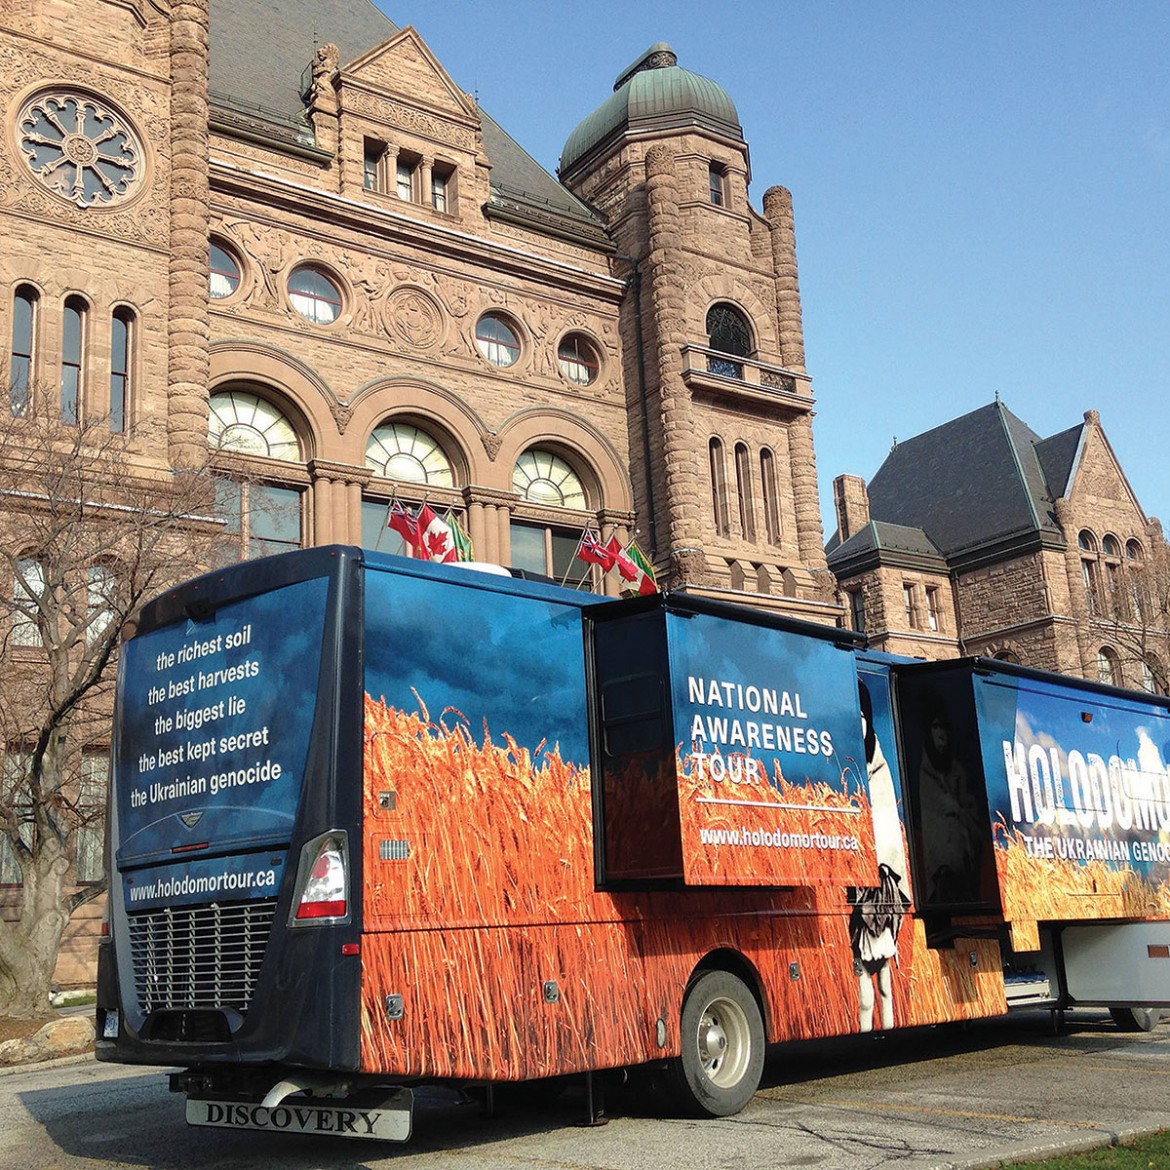 The Holodomor Mobile Classroom was launched at the Ontario Legislative Assembly at Queen’s Park.